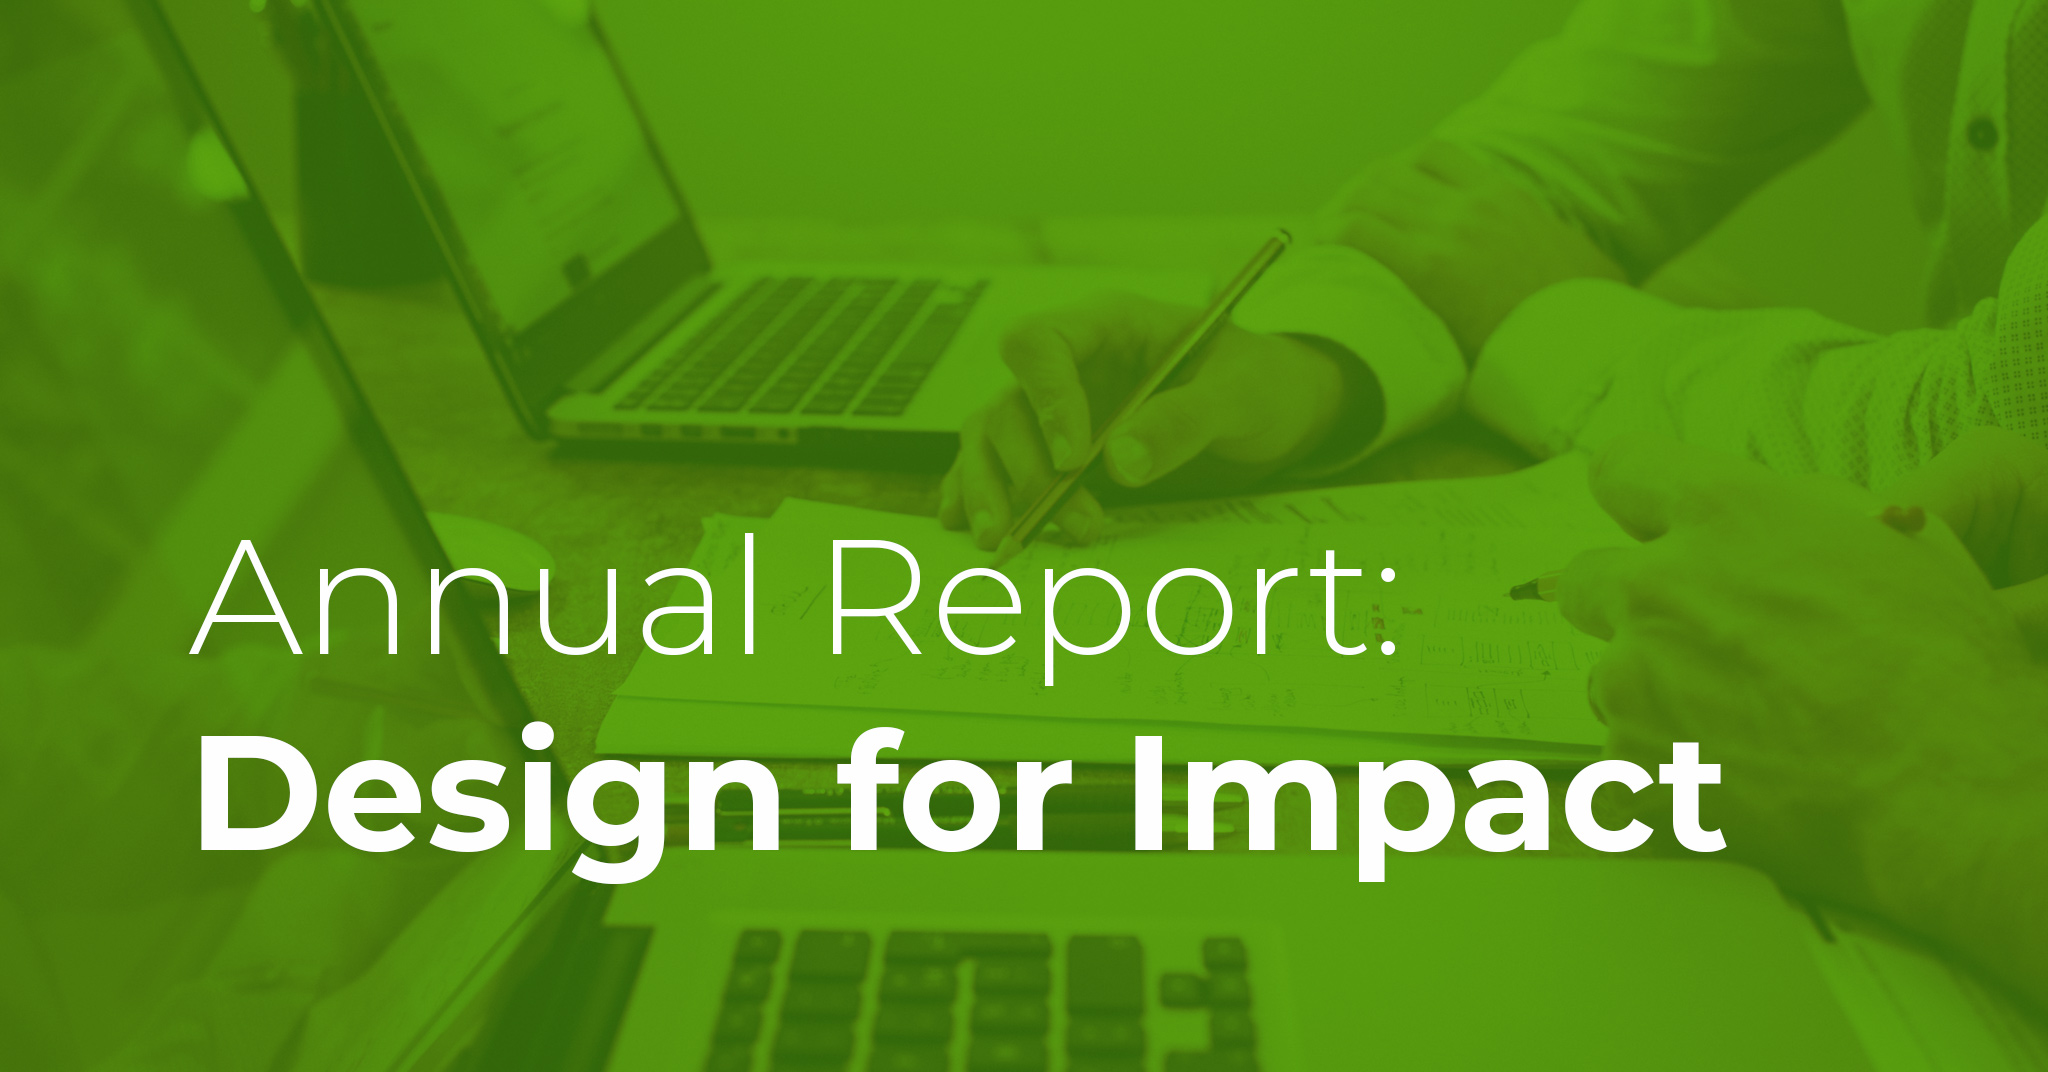 Featured image for “Annual Report: Design for Impact”